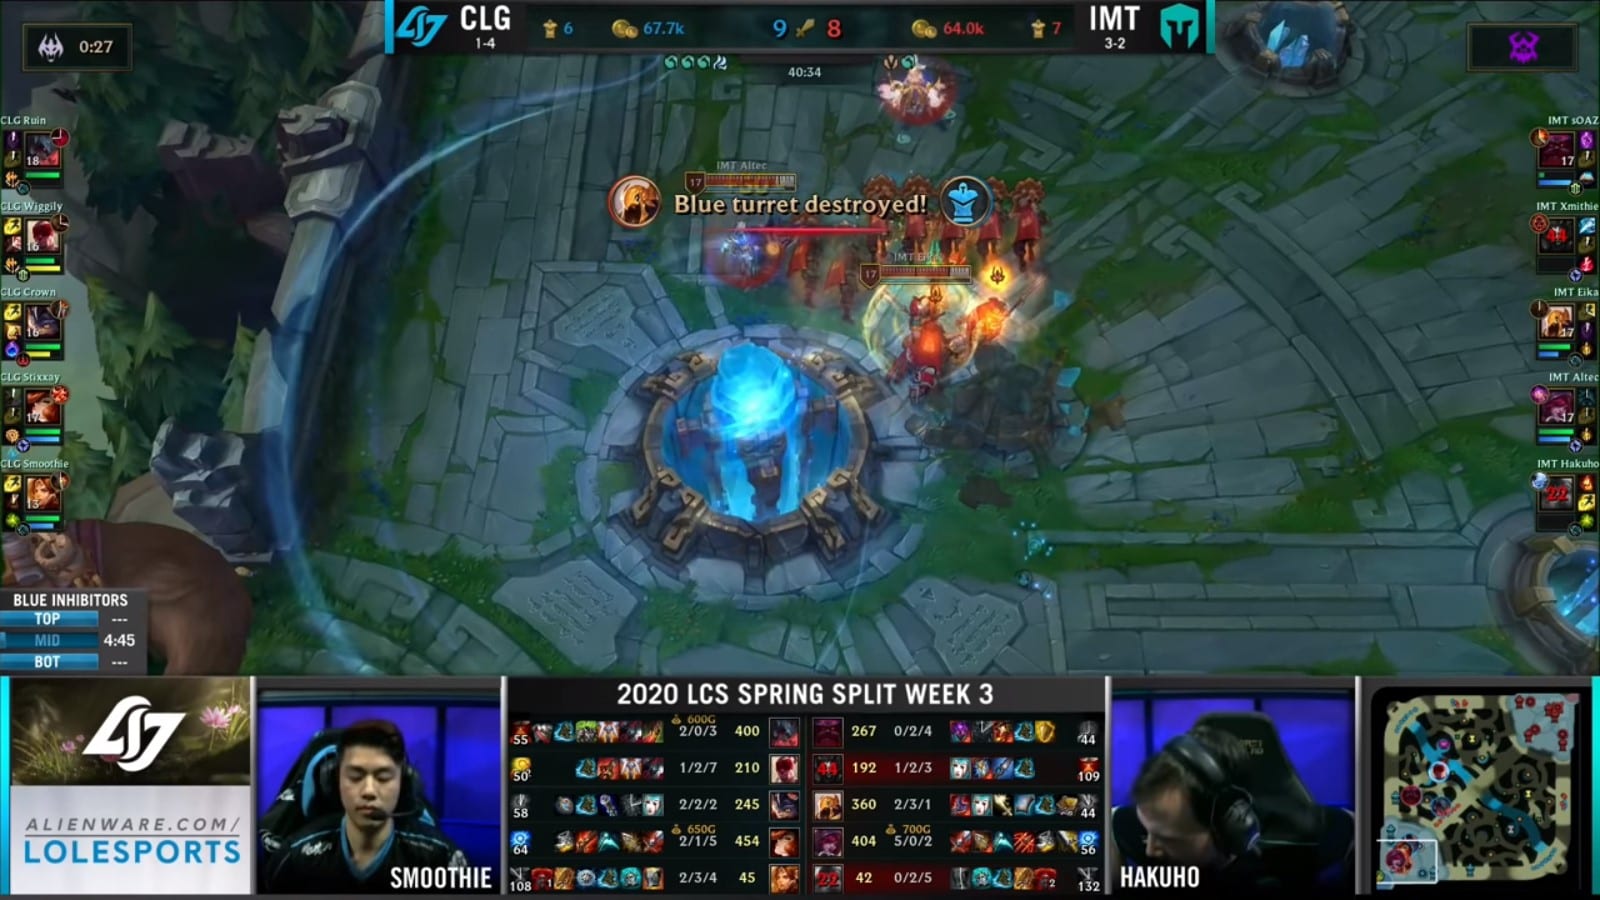 Altec and Eika destroyed the turrets and the Nexus, winning the match for IMT. 